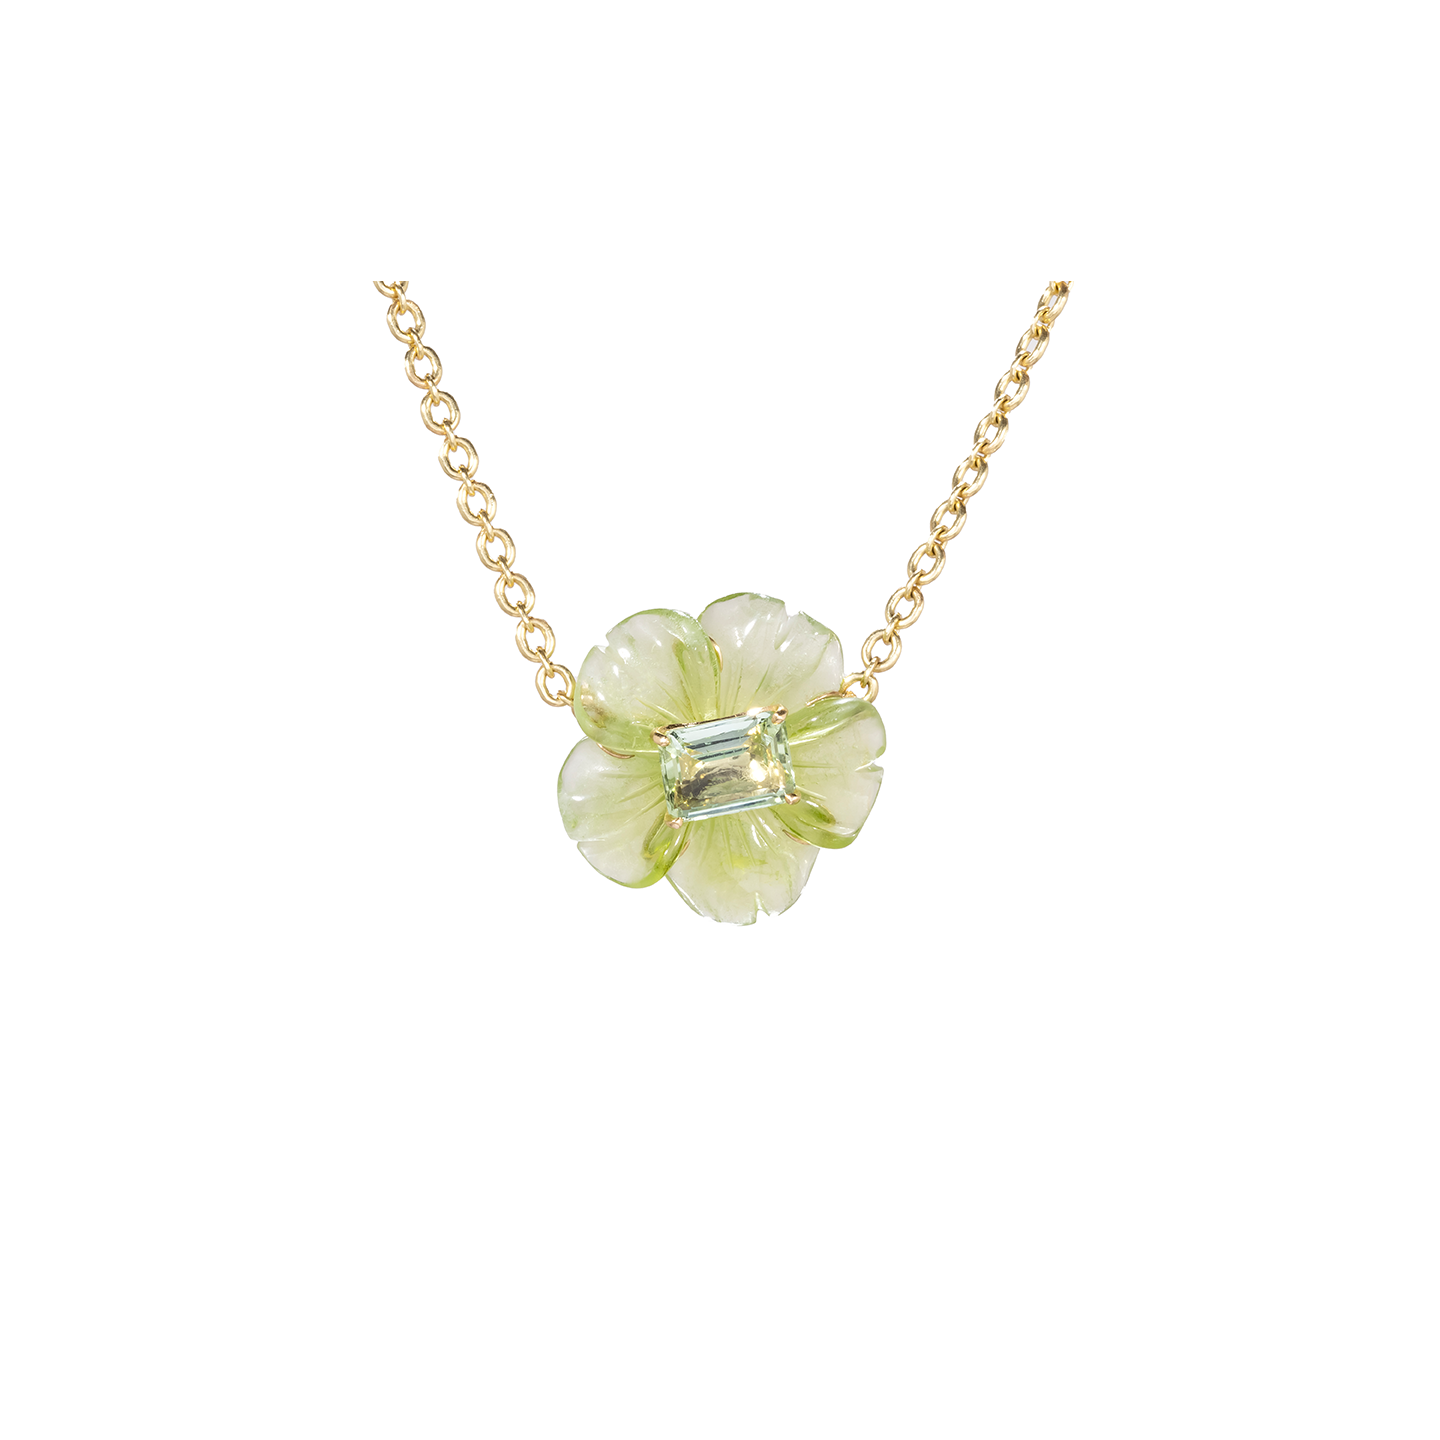 Irene Neuwirth Tropical Flower One-of-a-Kind Carved Peridot and Green Tourmaline Necklace